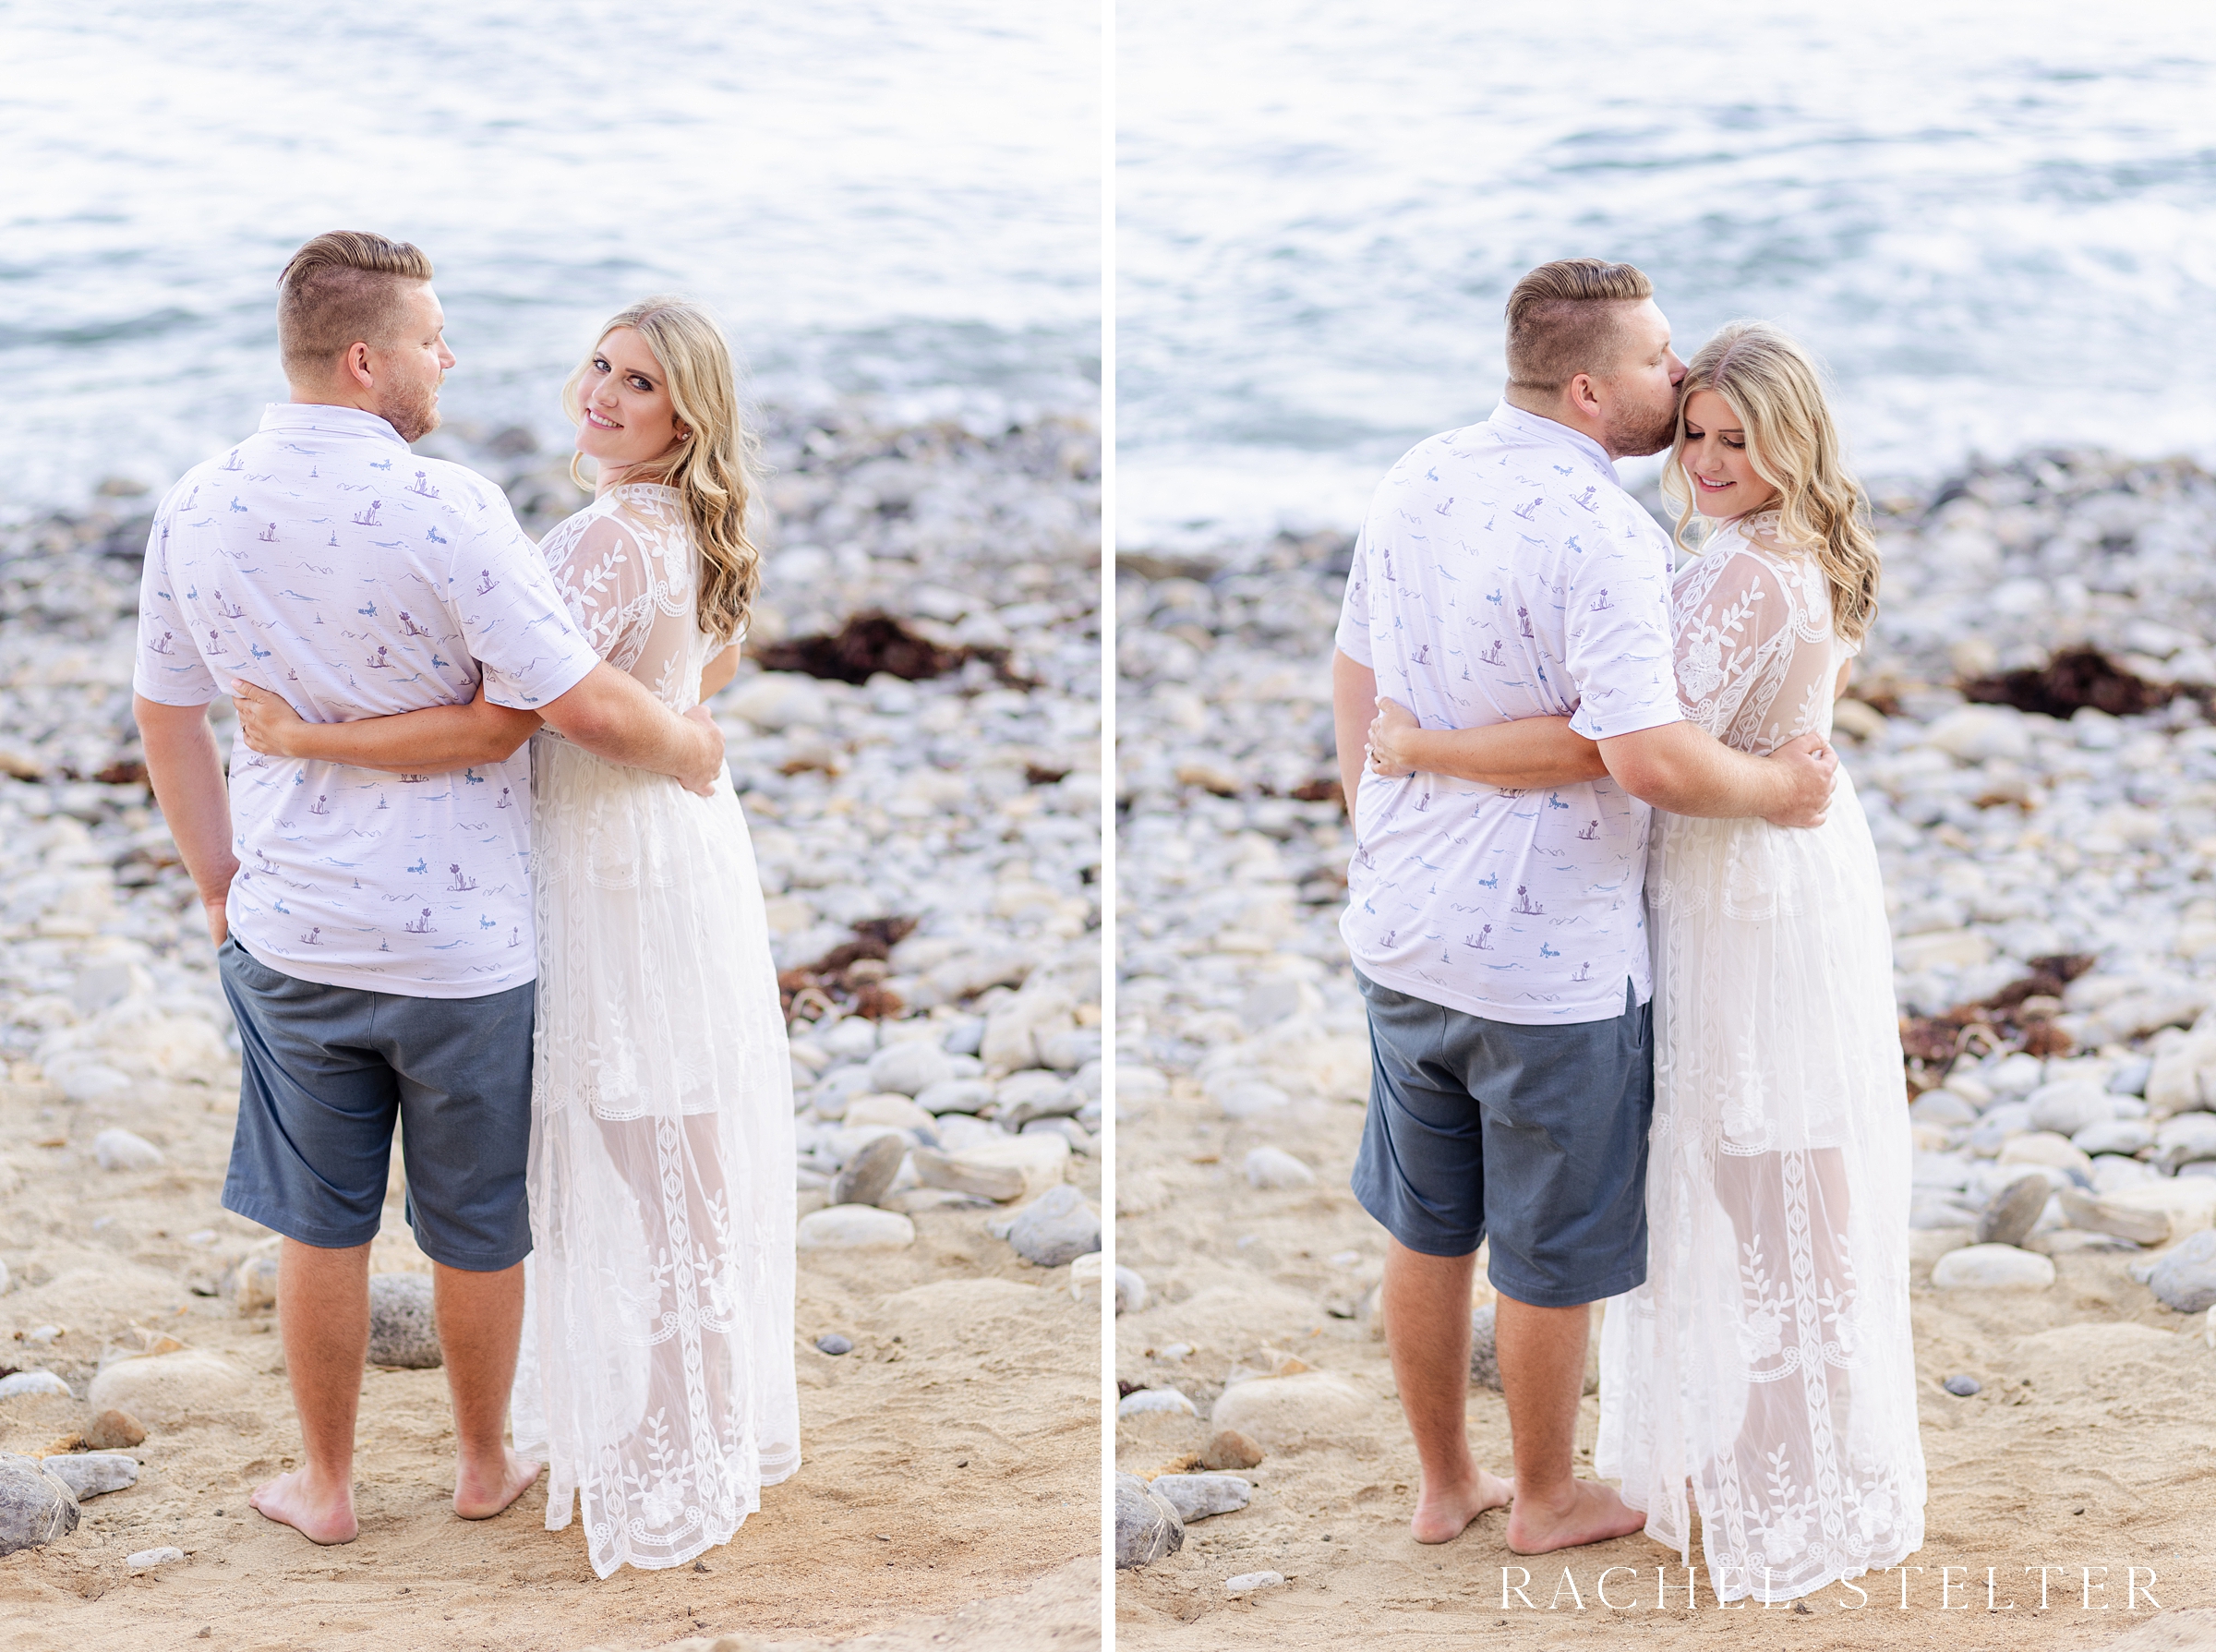 light and airy wardrobe for southern california beach engagement